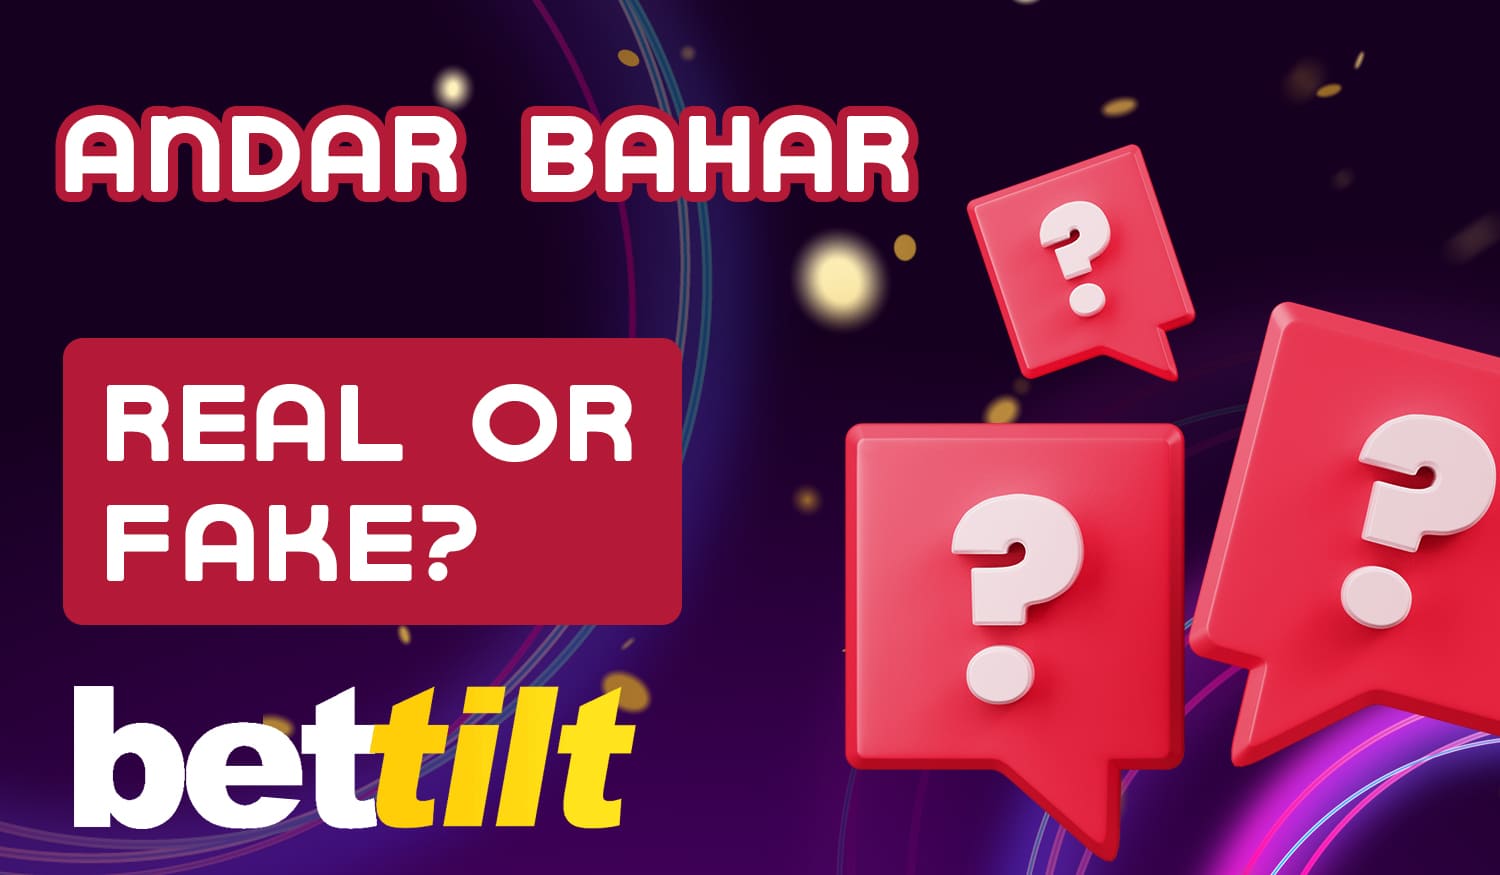 Can you trust Bettilt online casino site and play for money at Andar Bahar?